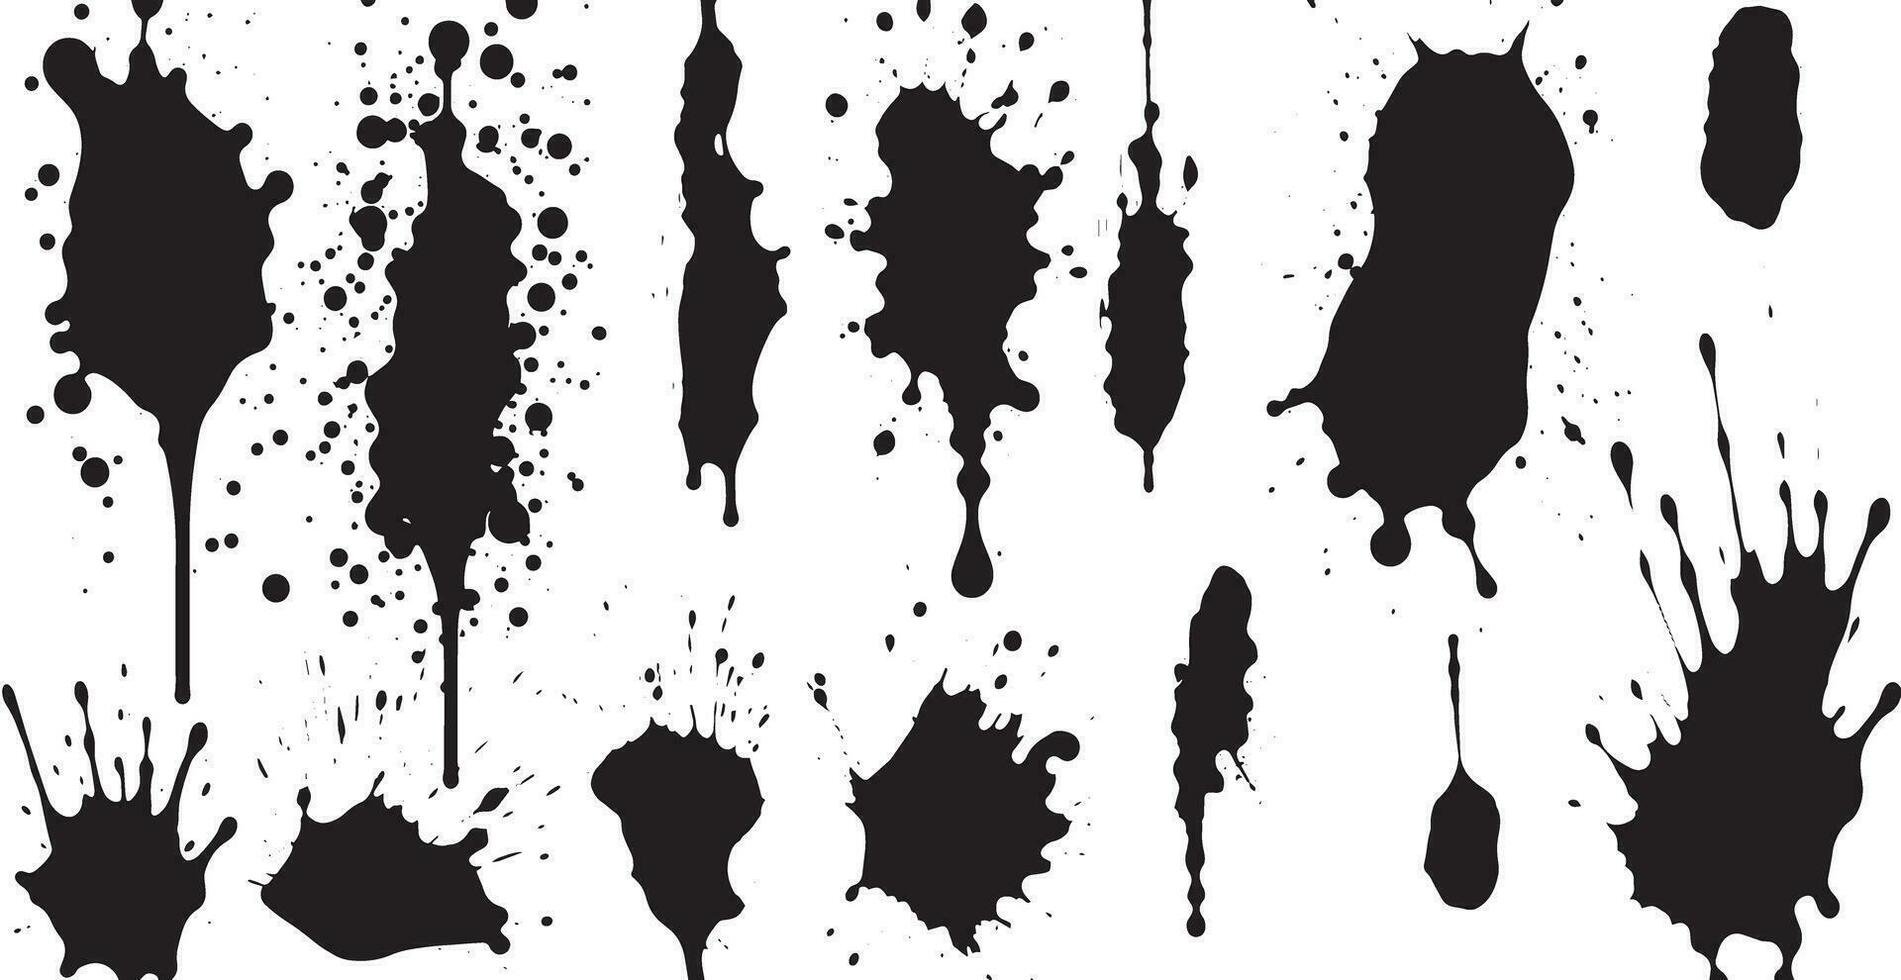 Set of vector brushes. Mega pack set of different brush strokes, black ink splatter, blots, round freehand drawings, grungy drawn lines, waves, circles, triangles, art design elements